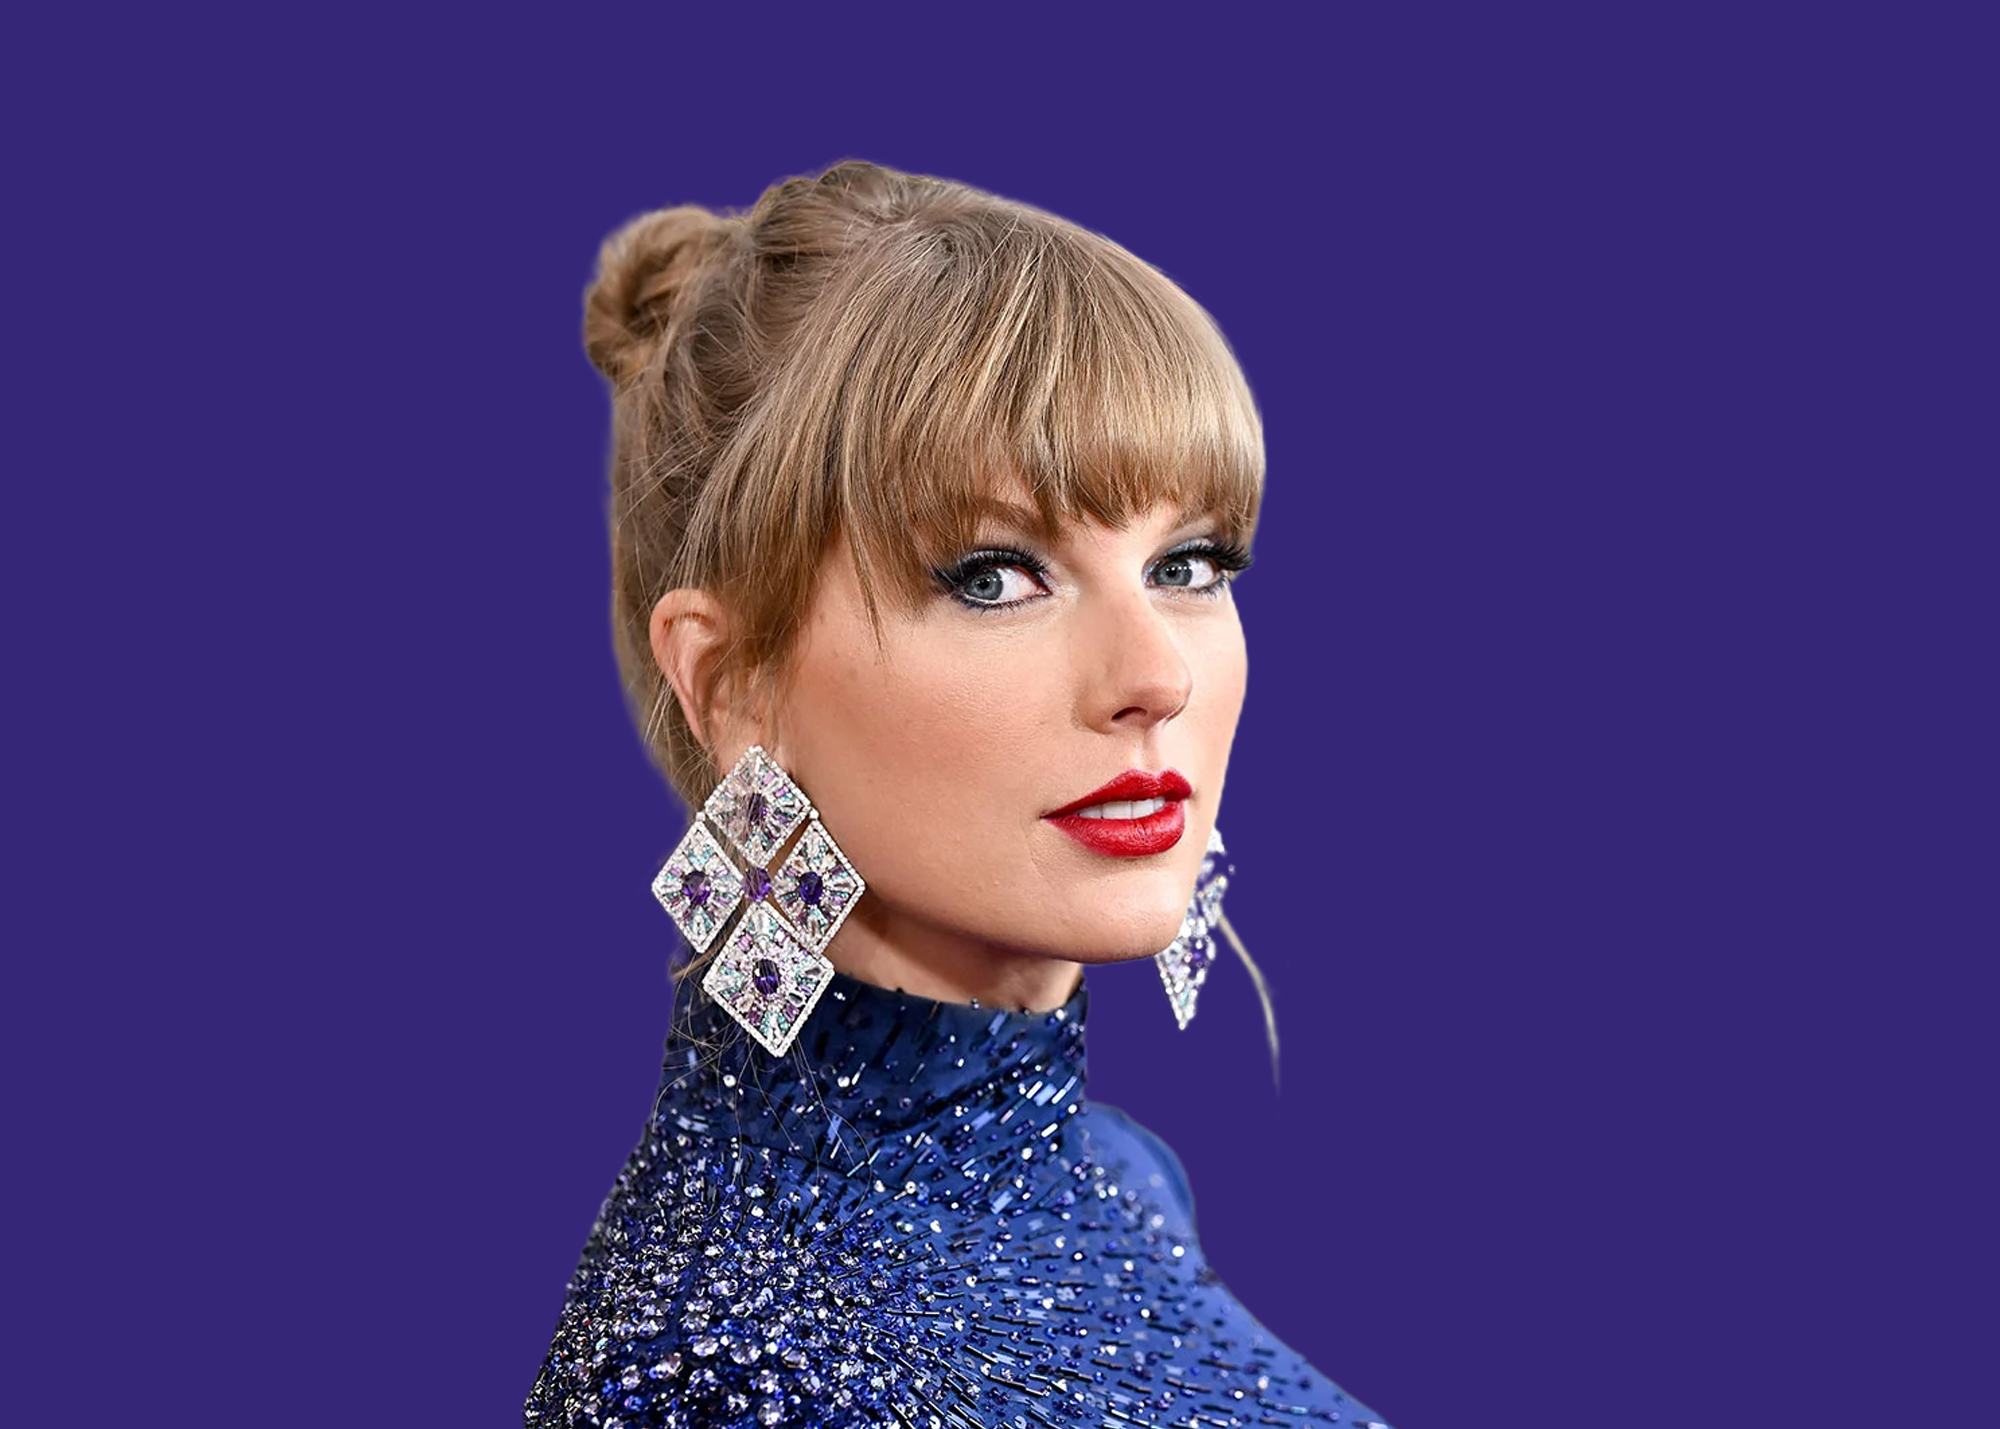 Never Go Out of Style: What Businesses Should Learn From Taylor Swift